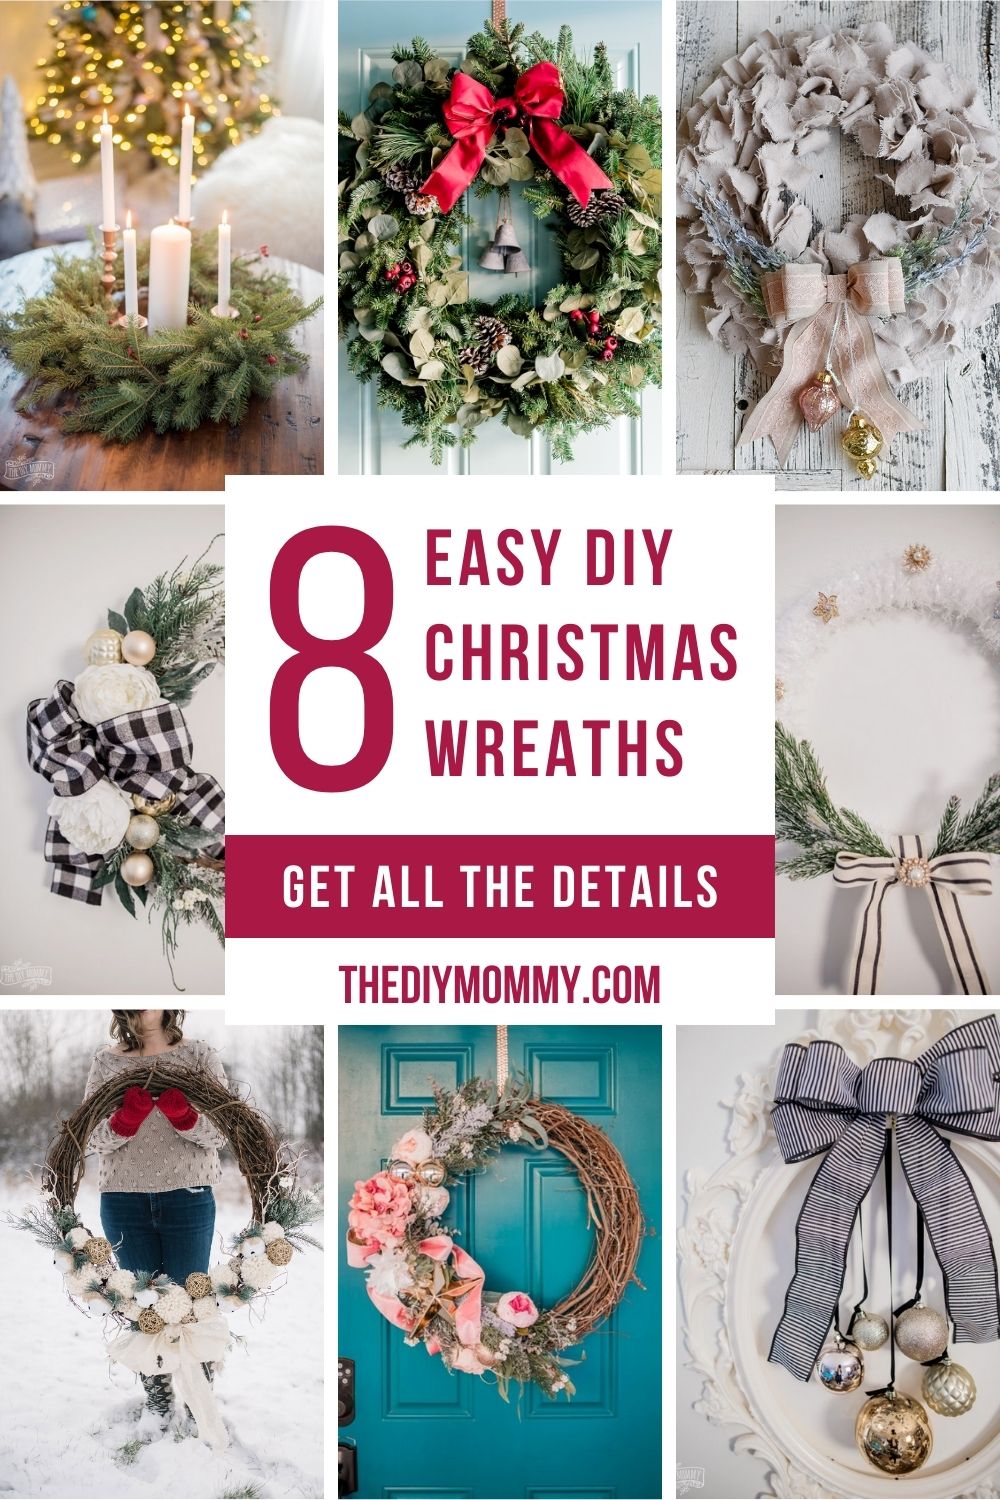 8 Easy DIY Christmas Wreaths With Step-By-Step Instructions